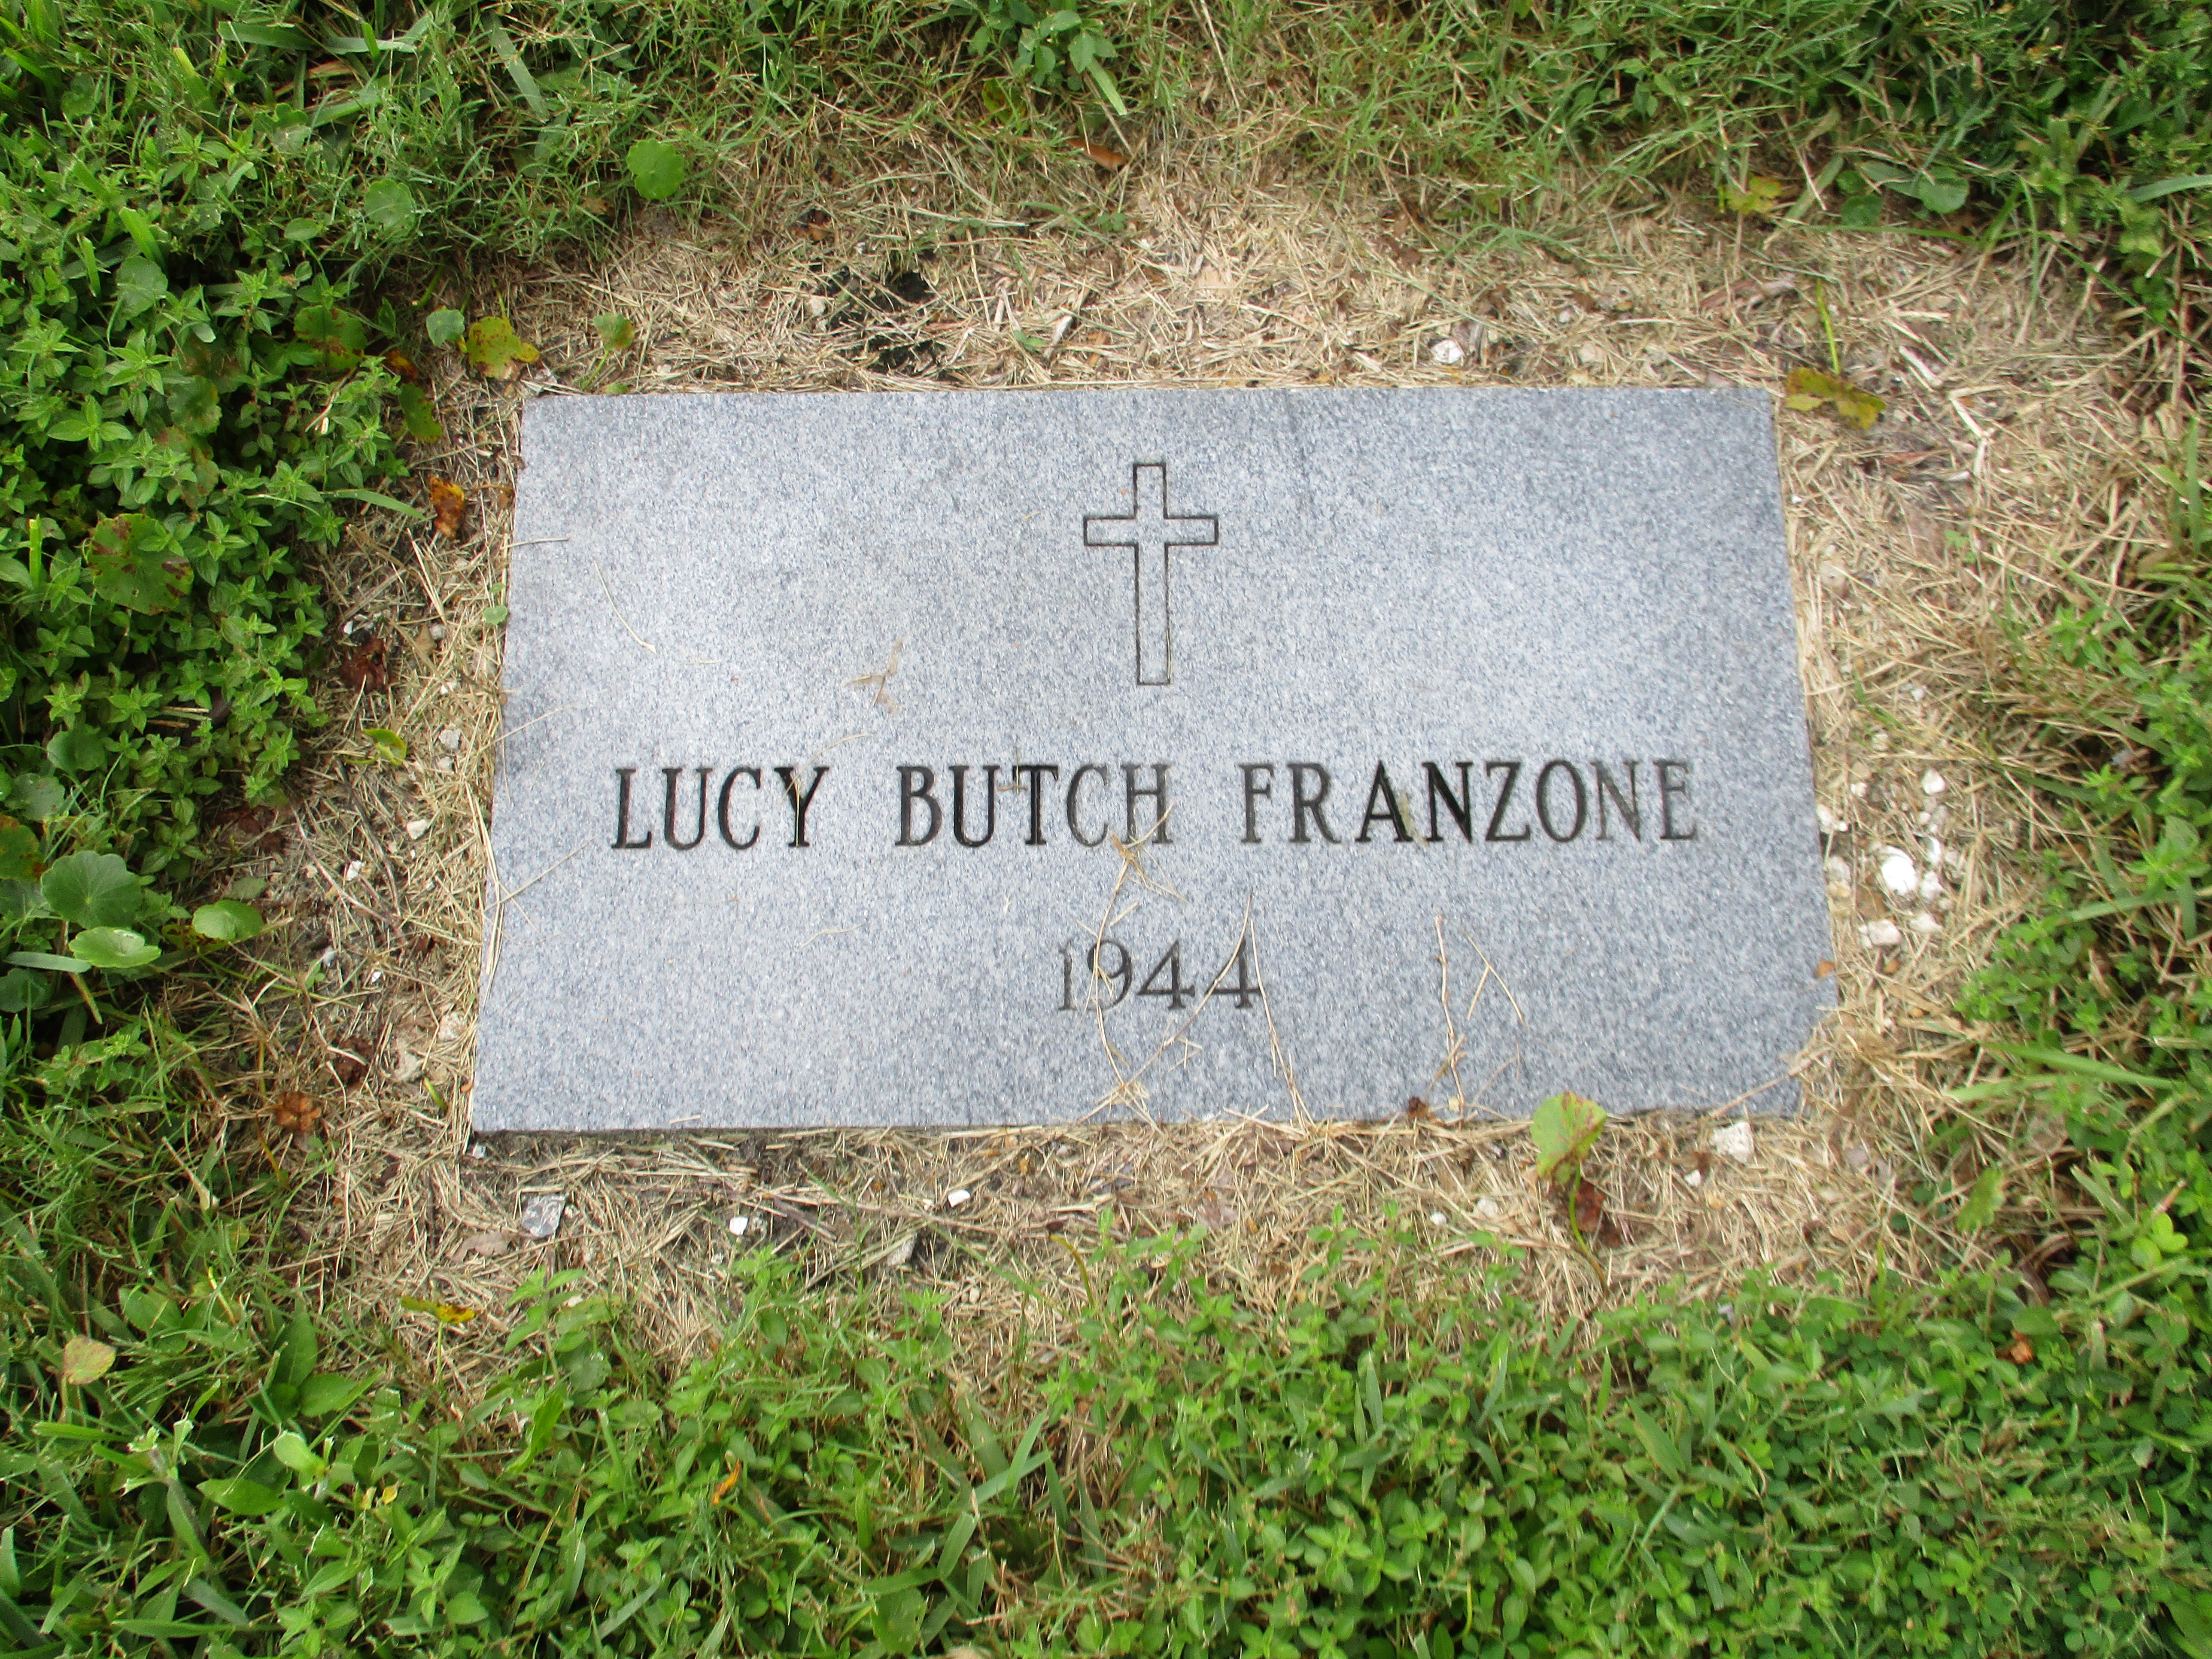 Lucy Butch Franzone